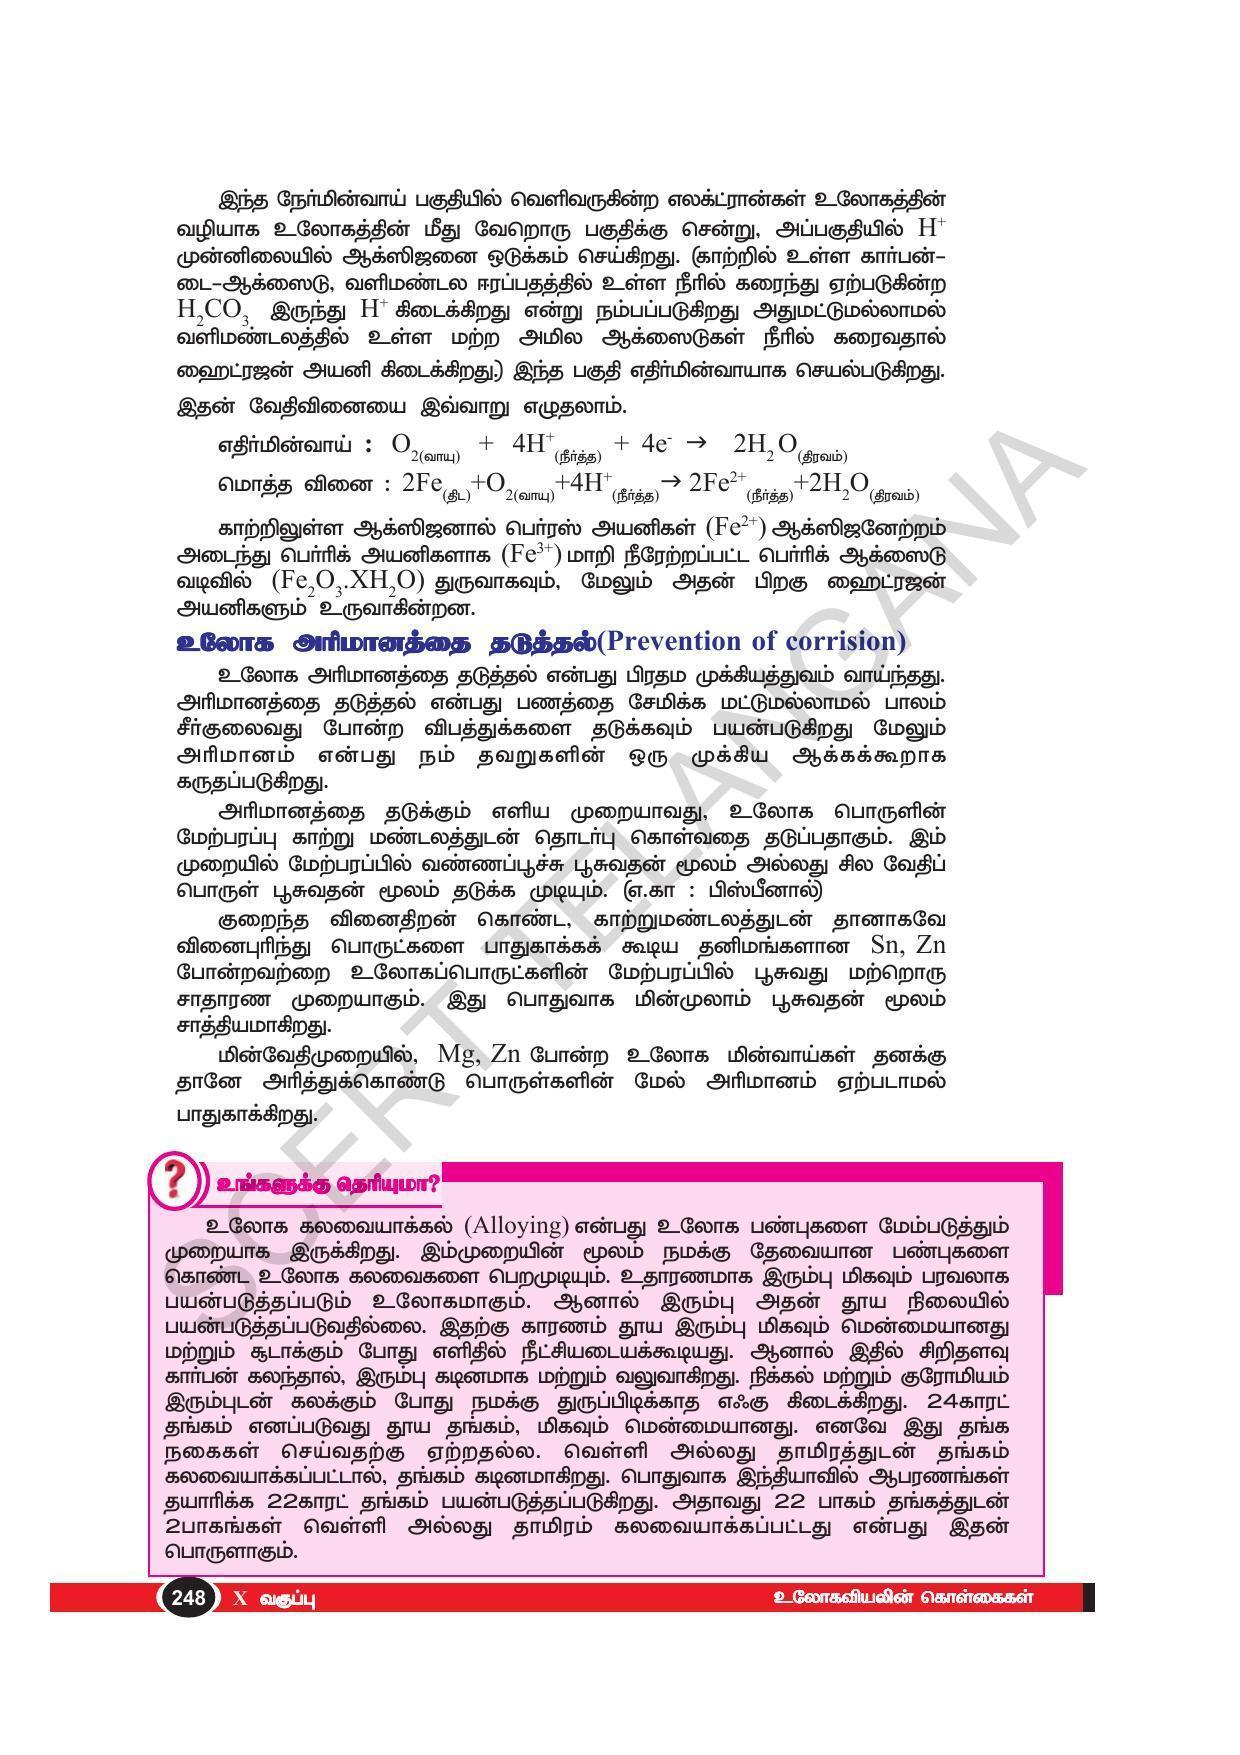 TS SCERT Class 10 Physical Science(Tamil Medium) Text Book - Page 260